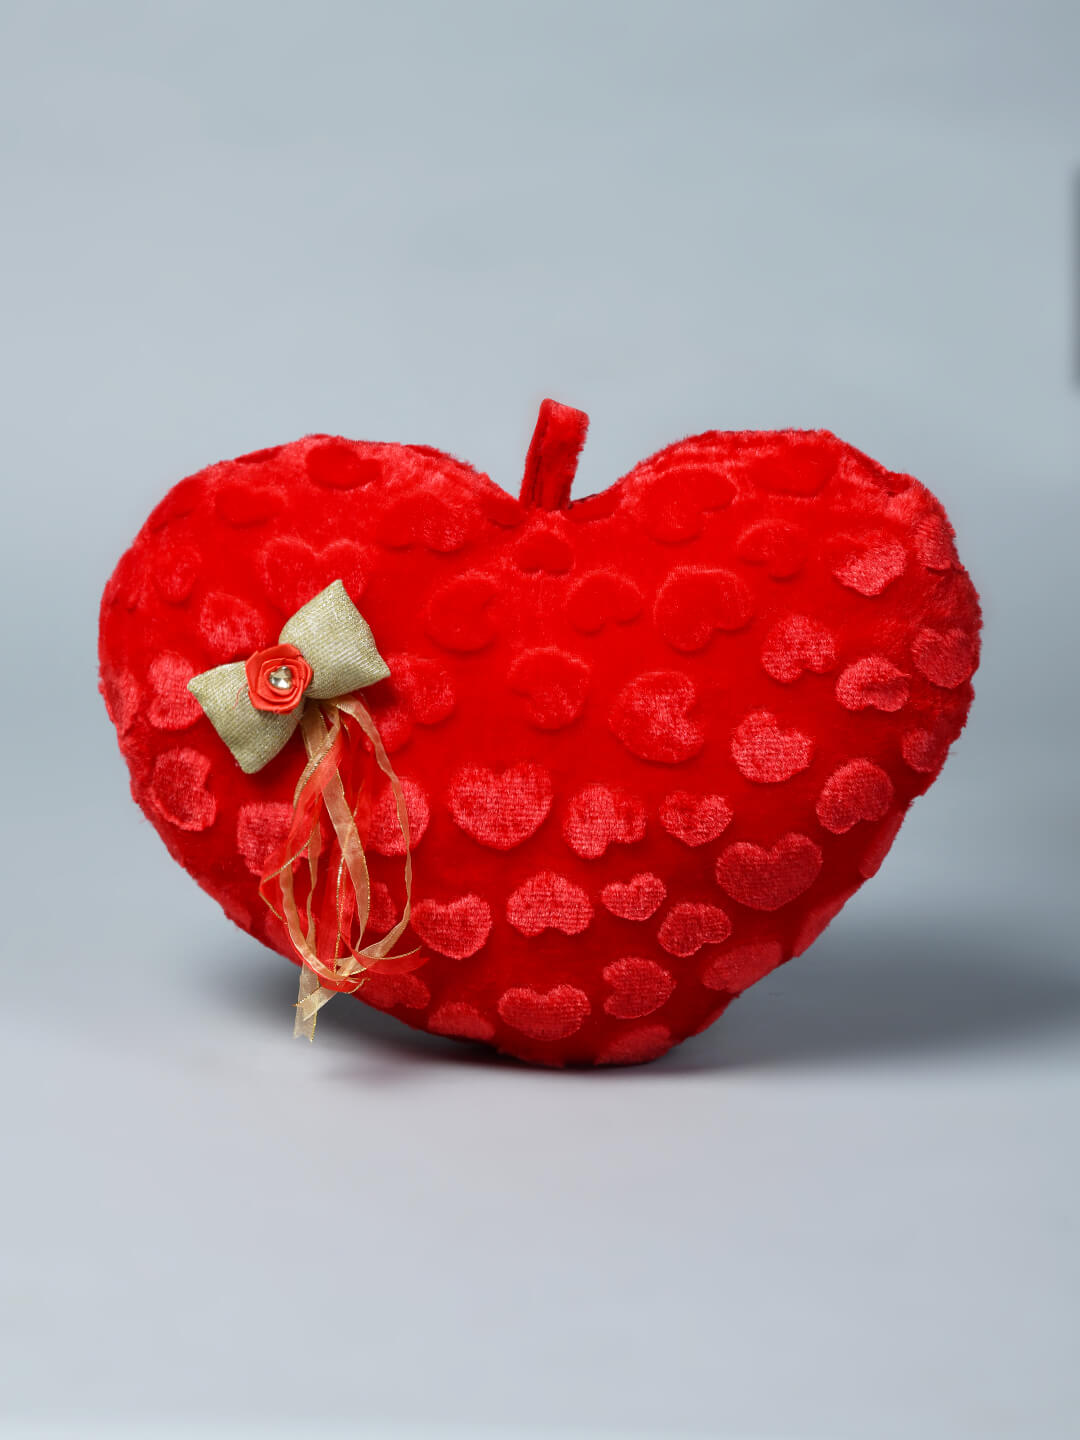 Kwality Dreams Cuddly Red Heart Stuffed Toy that Radiates Love